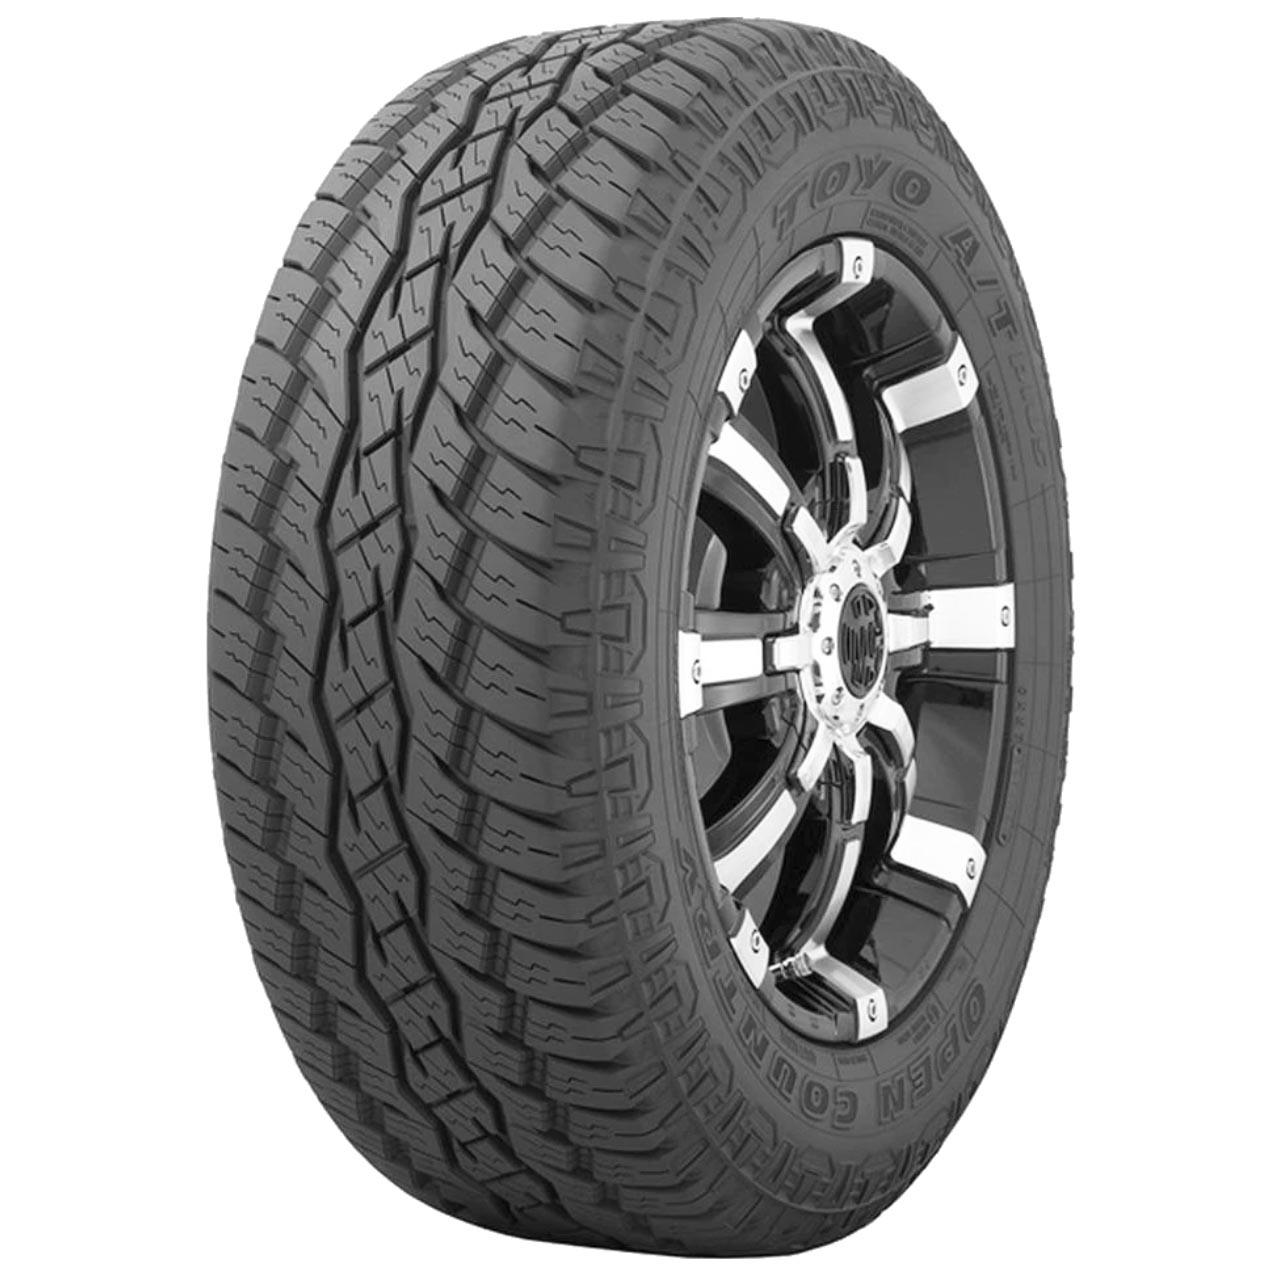 Toyo Open Country AT Plus 275/70R18C 115/112S